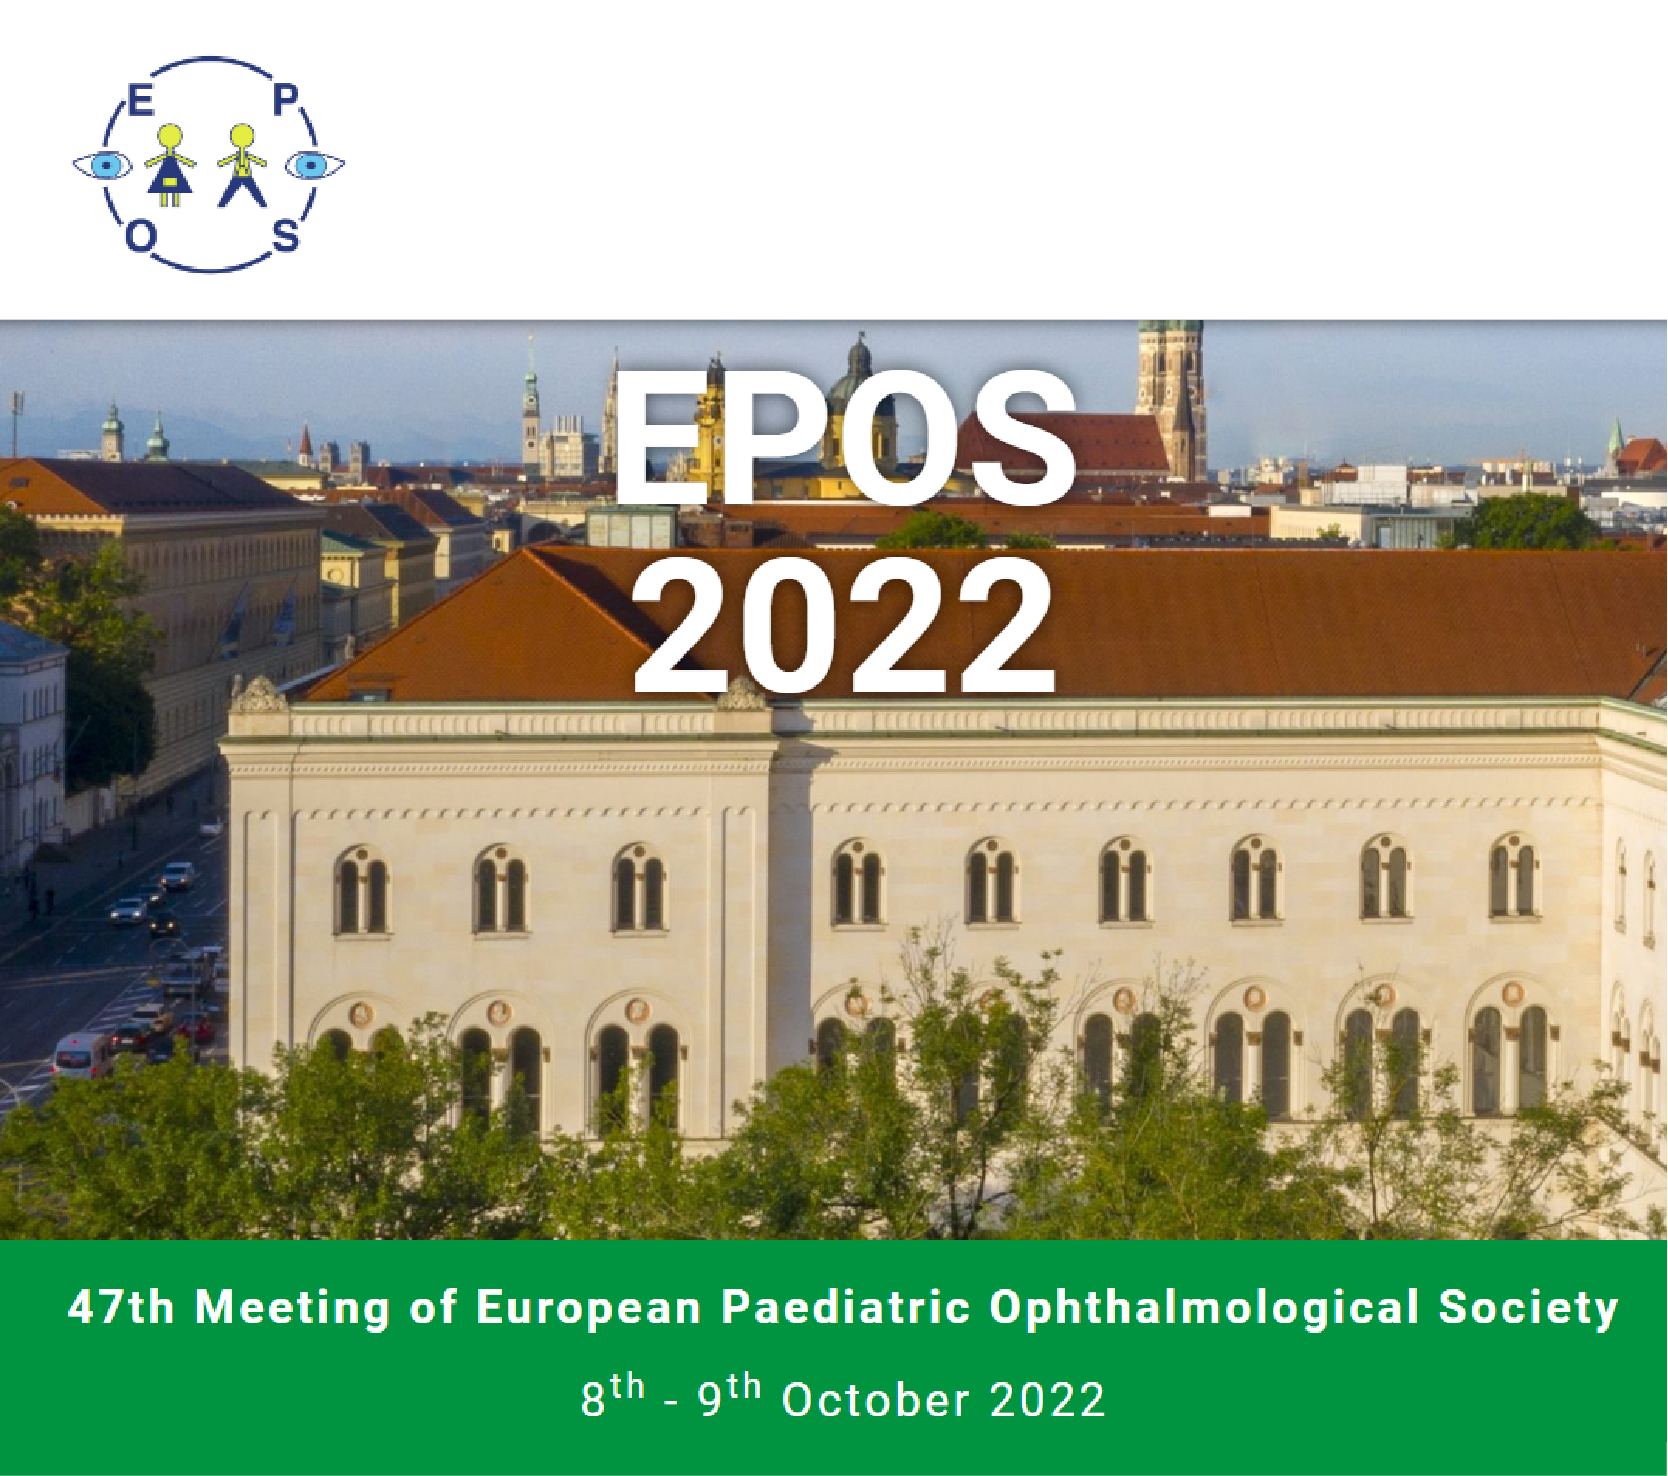 The 47th Annual Meeting of EPOS 2022